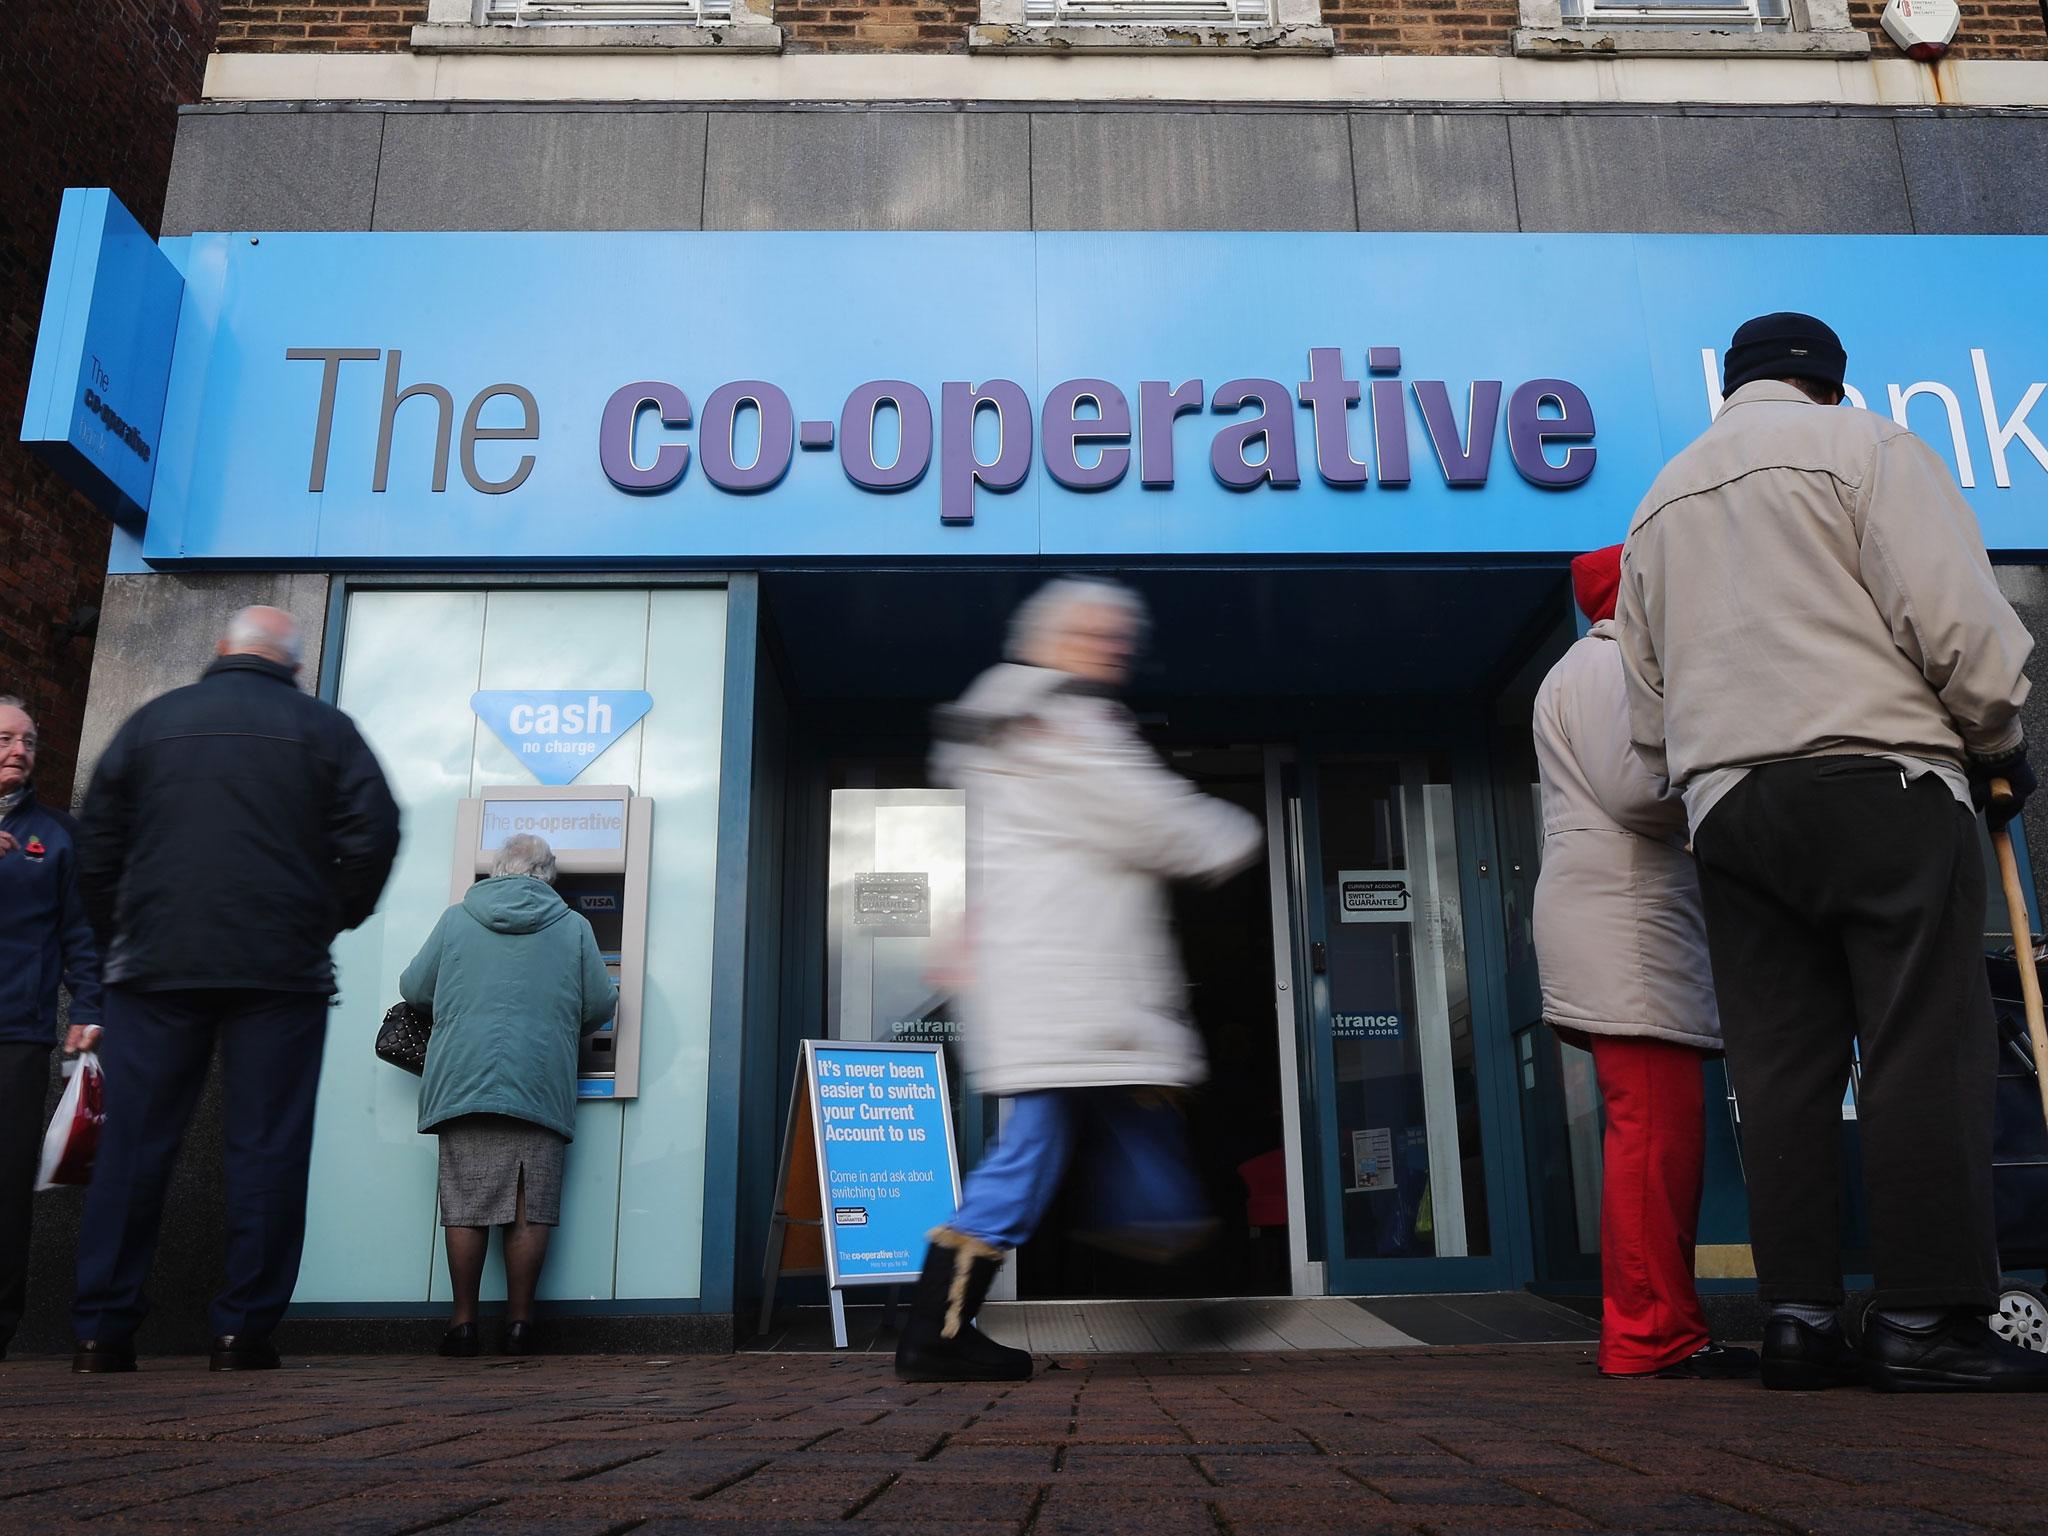 George Osborne has announced an independent Treasury inquiry into the turmoil at the Co-operative Bank